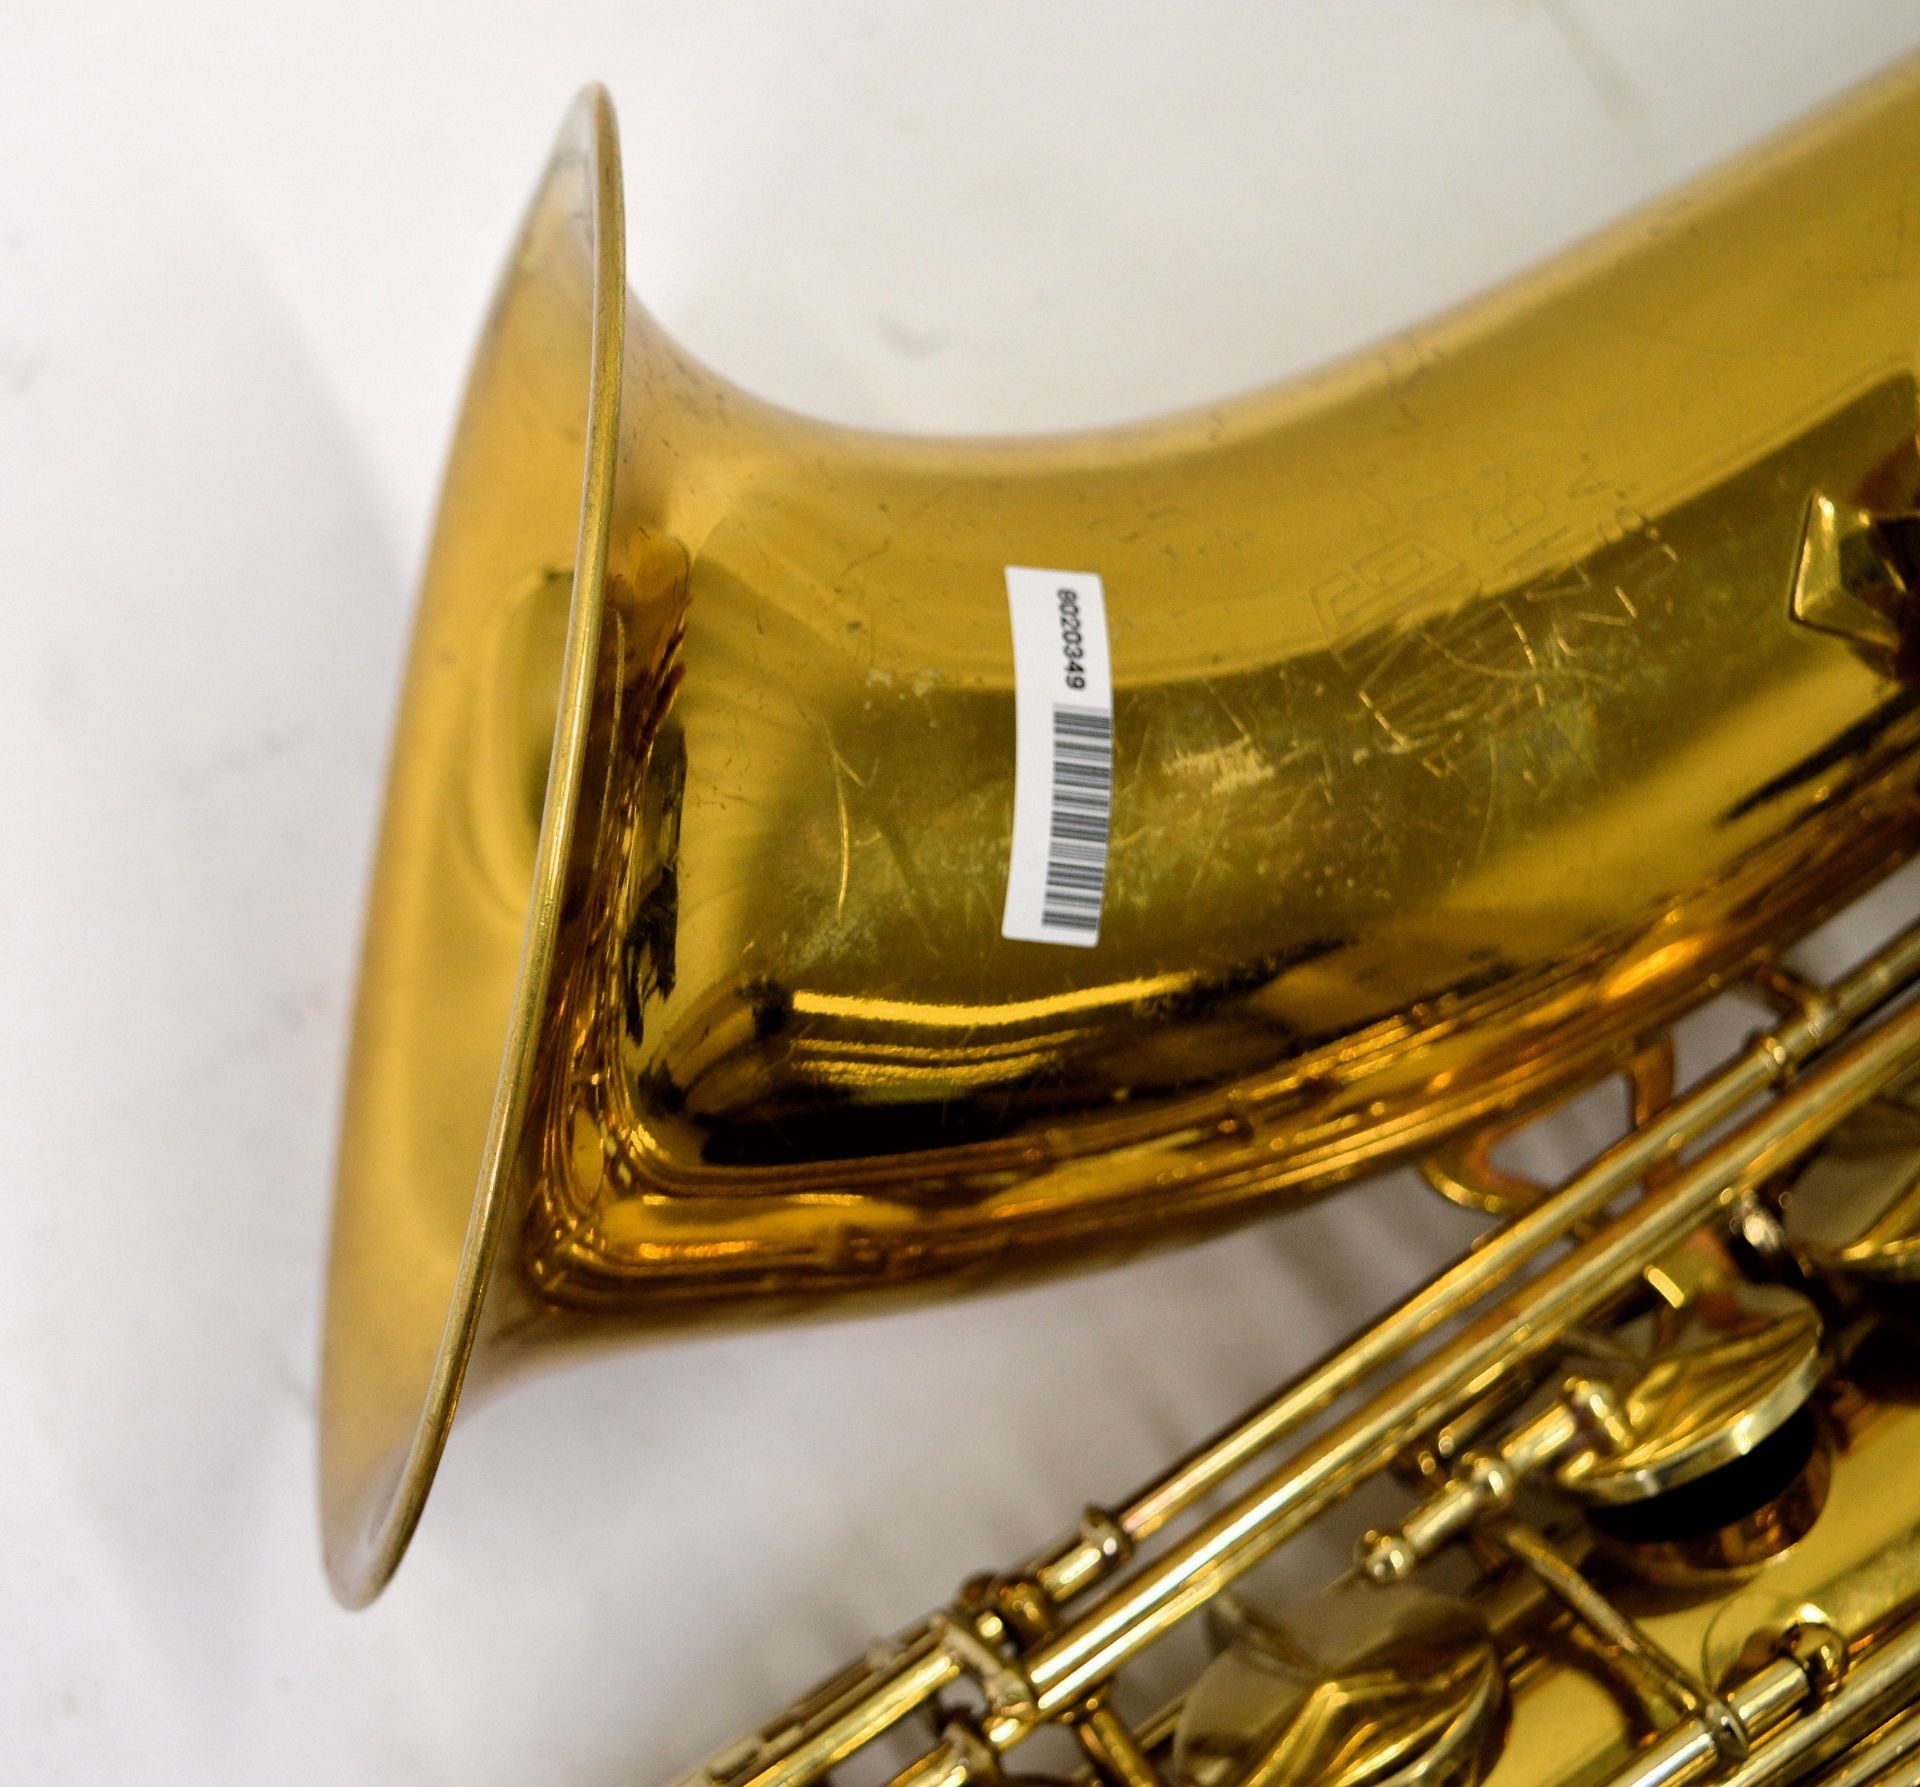 King Model 2416 Saxophone with Case. Serial No. 871174. - Image 19 of 23